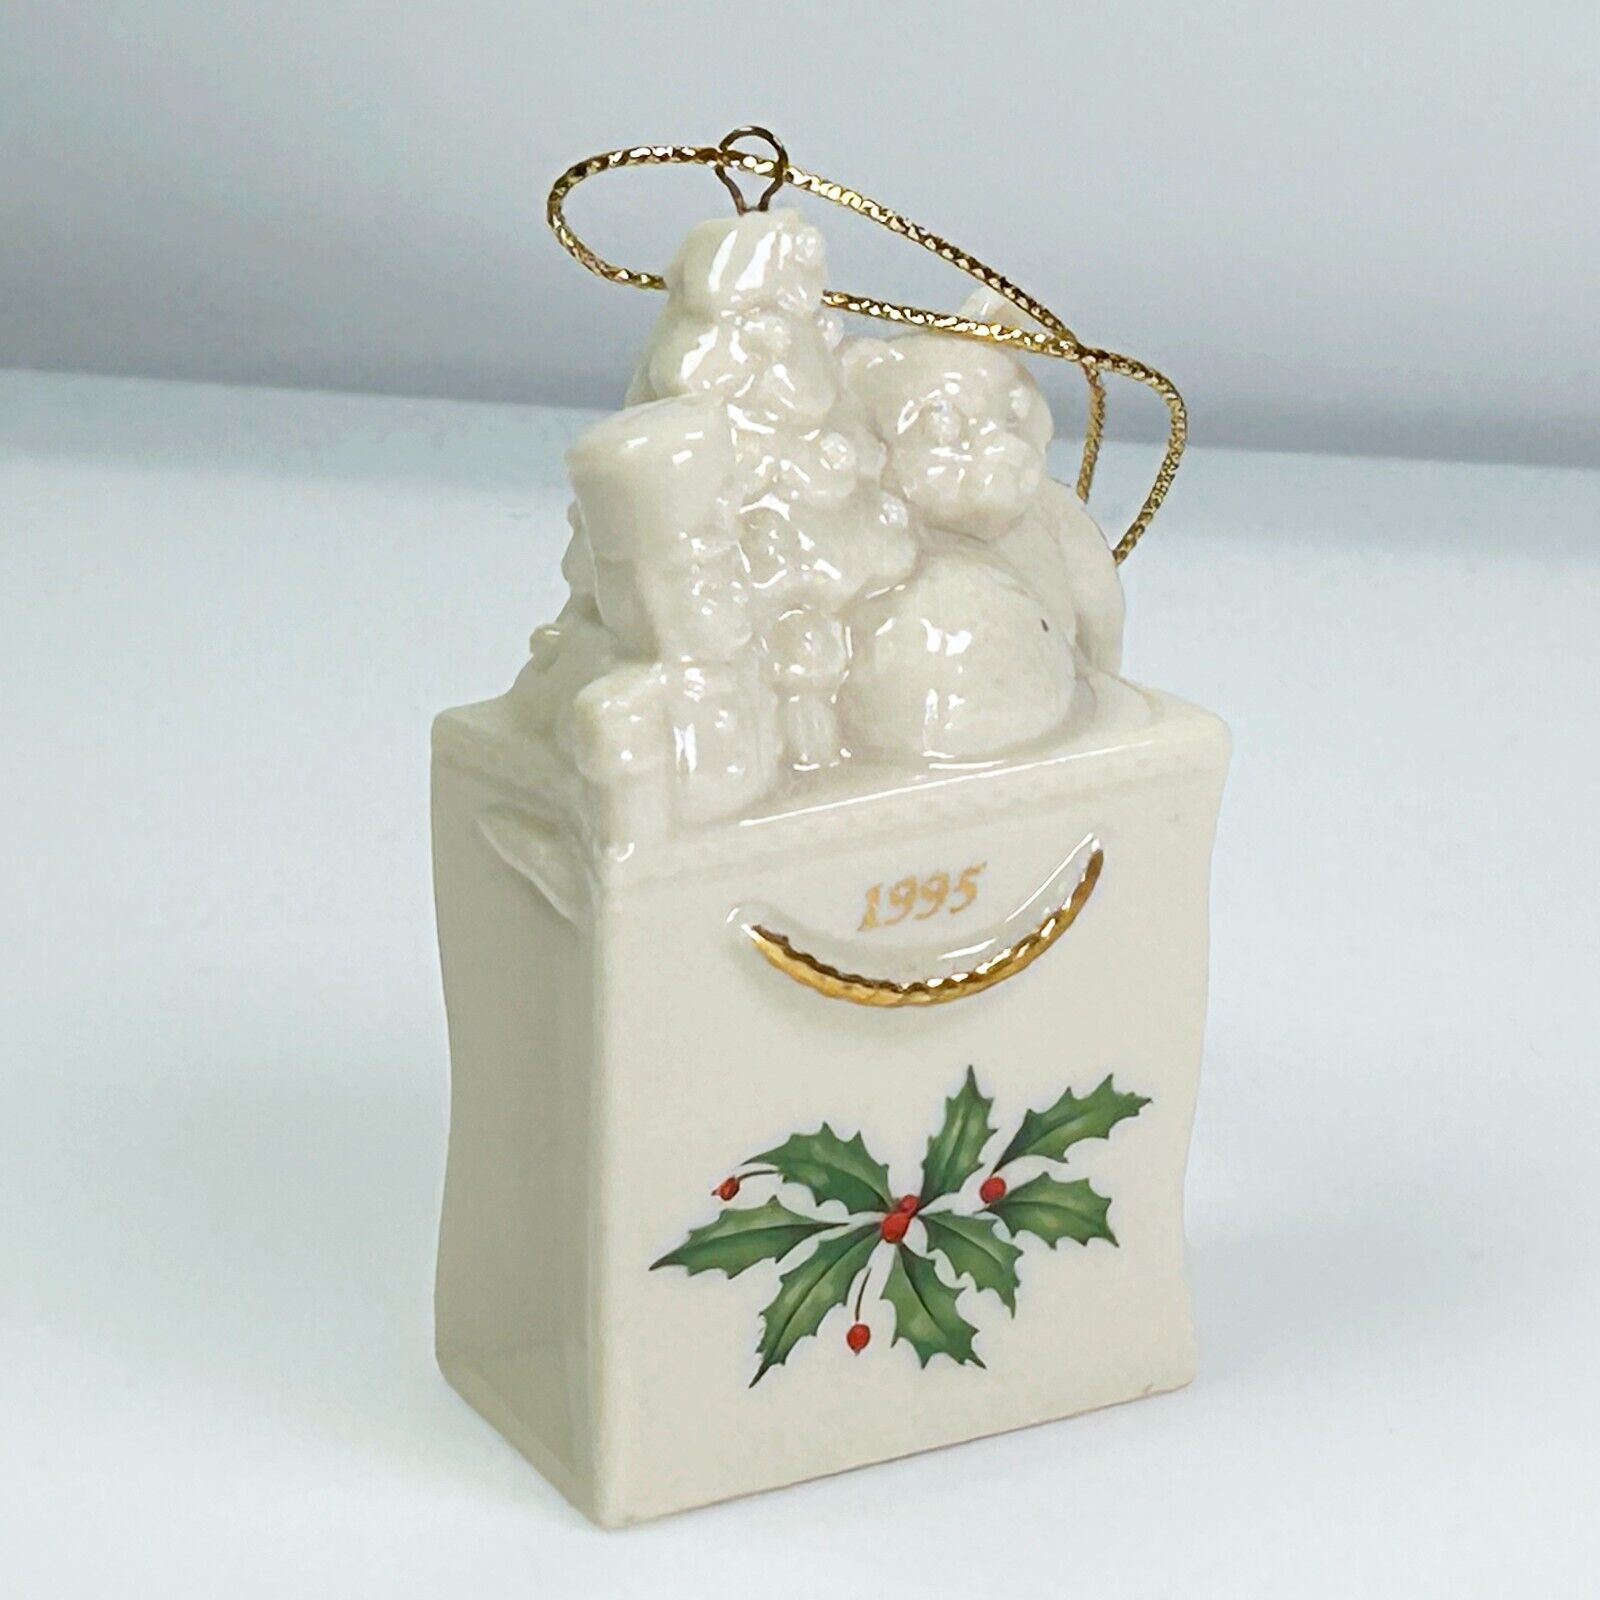 LENOX 1995 Porcelain HOLIDAY PACKAGE Christmas Ornament 4.25